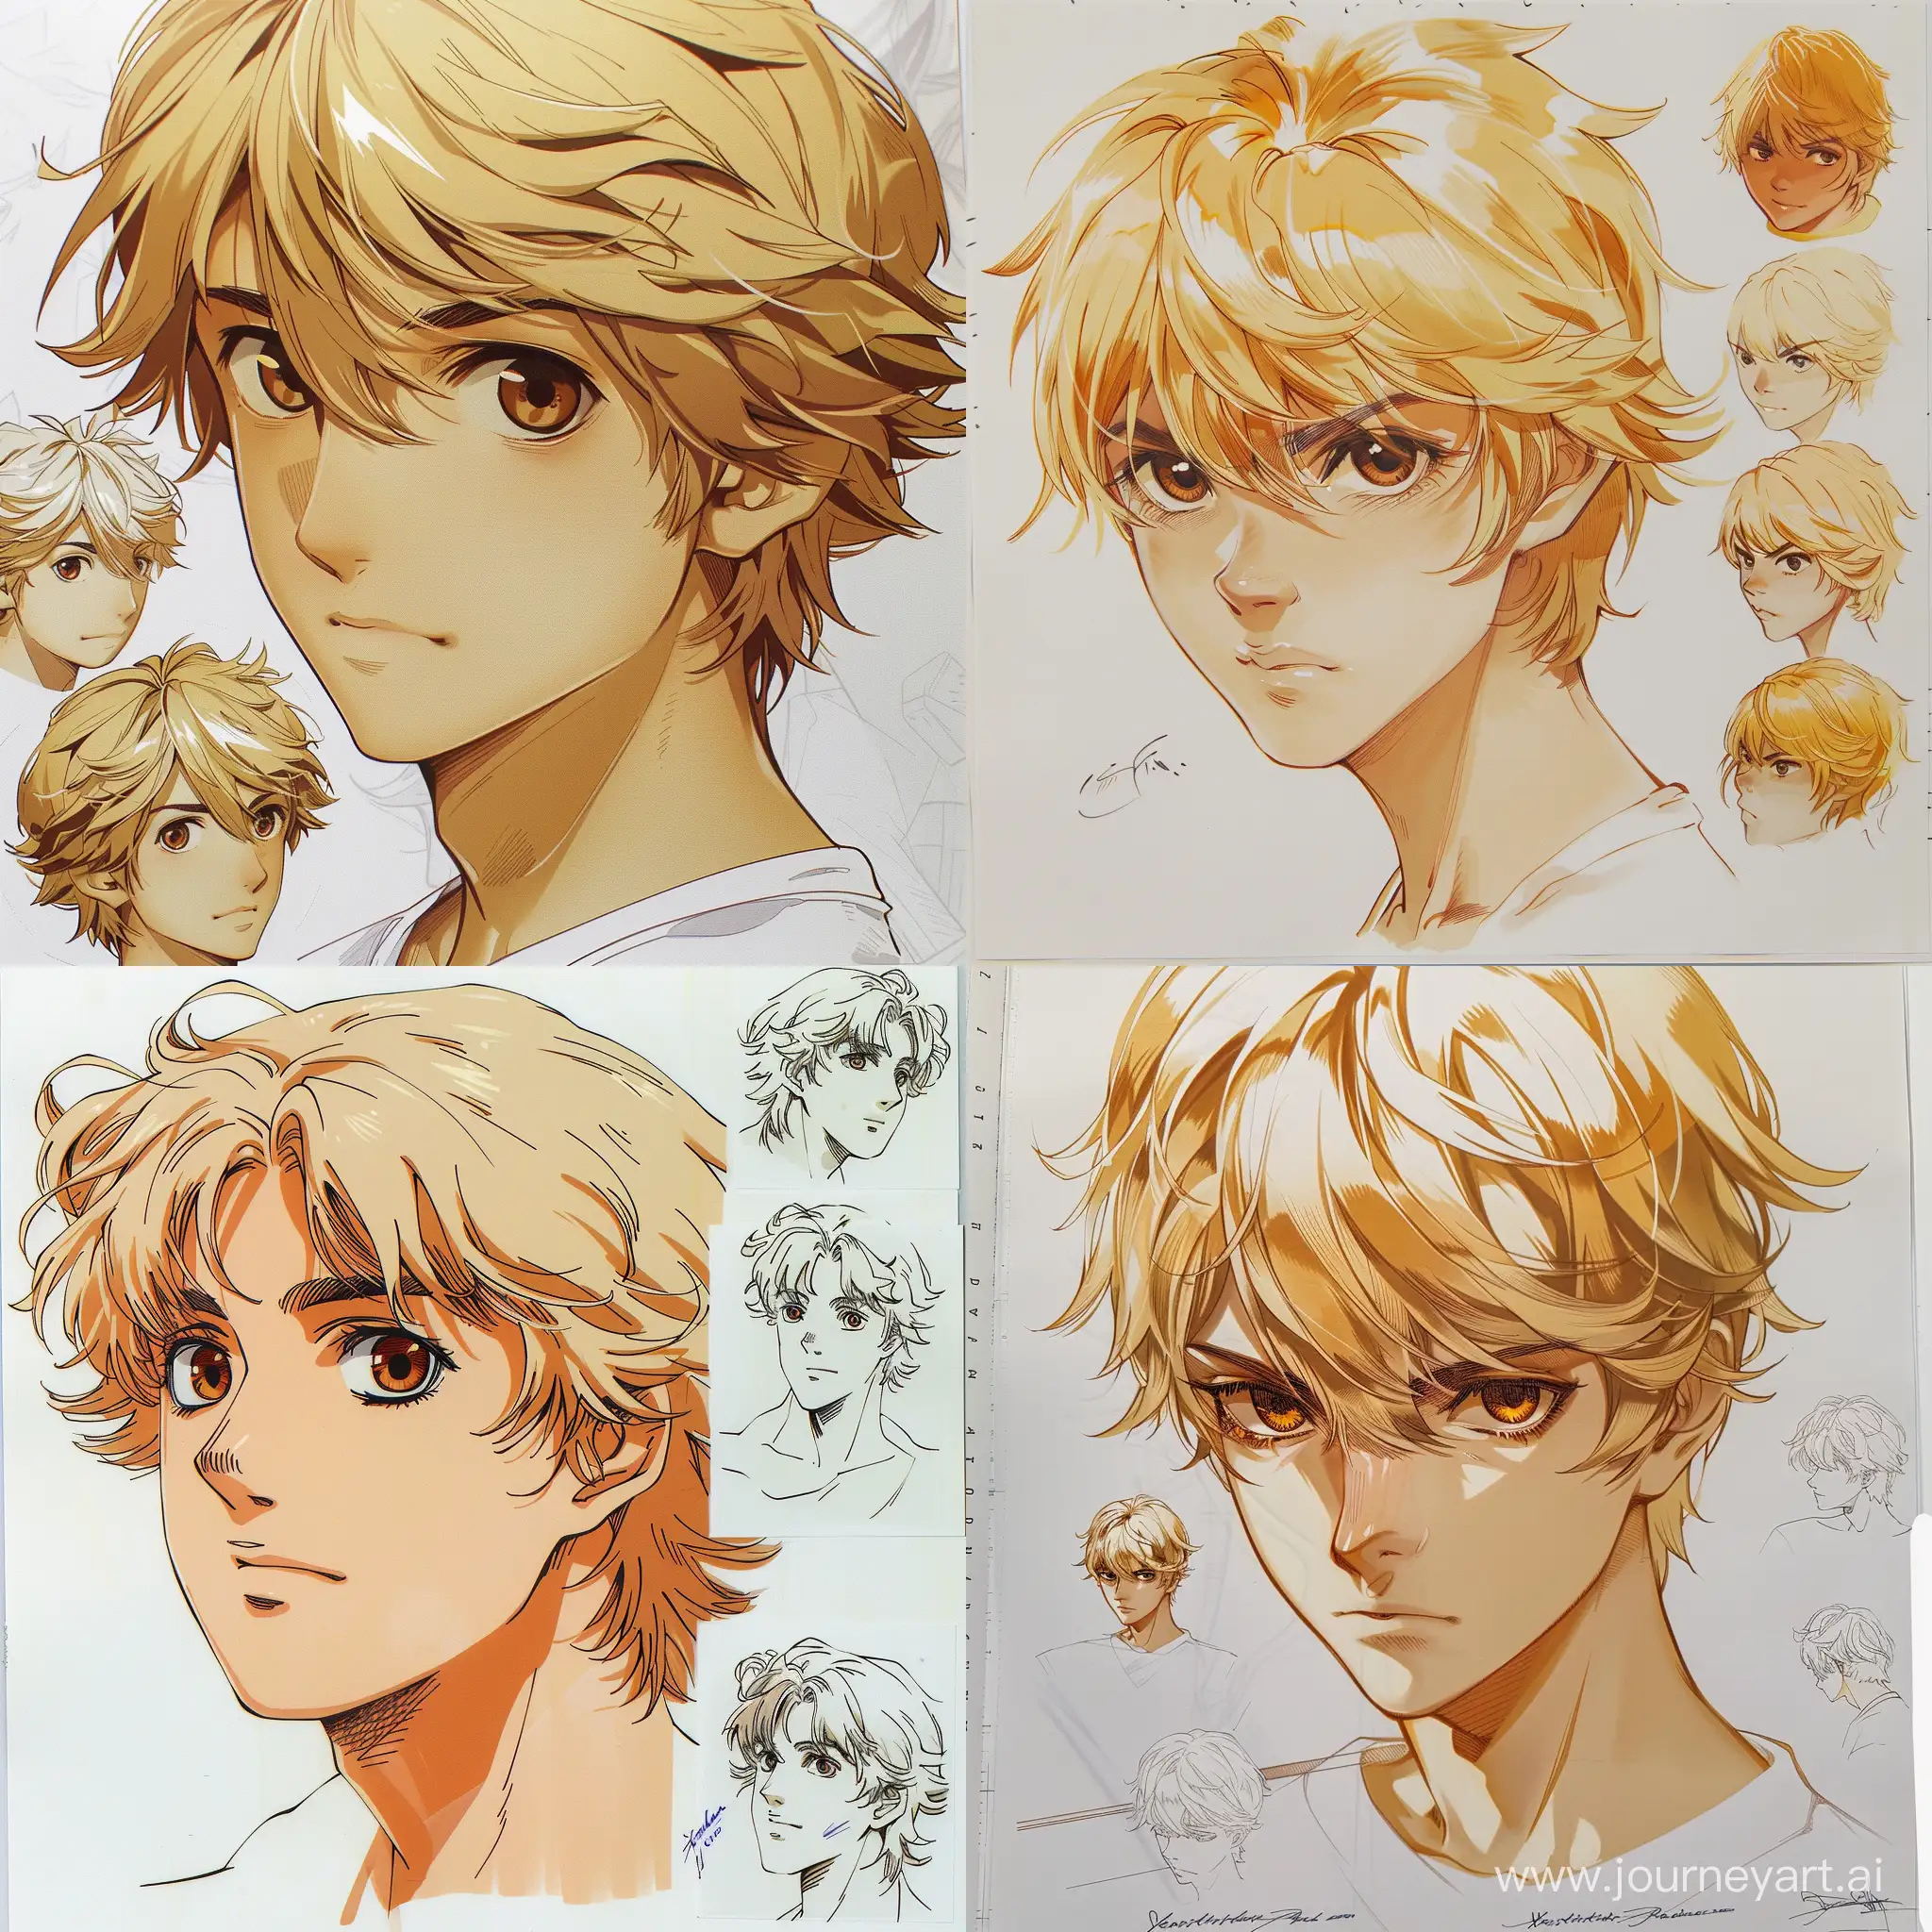 CloseUp-Character-Design-of-Handsome-Blond-Male-with-Brown-Eyes-on-White-Background-in-Yoshitaka-Amano-Style